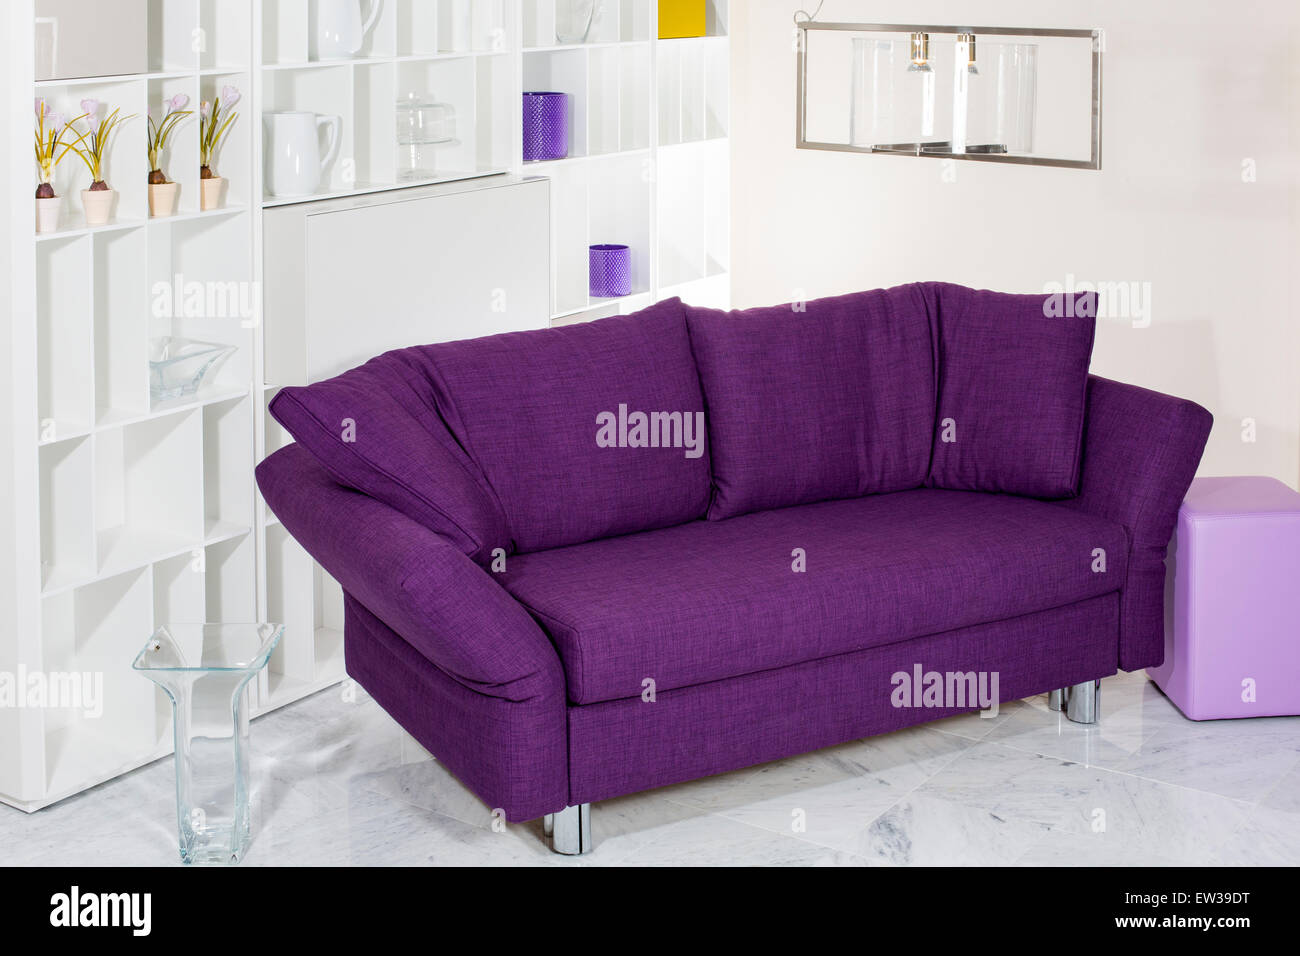 purple couch in front of white wall unit Stock Photo